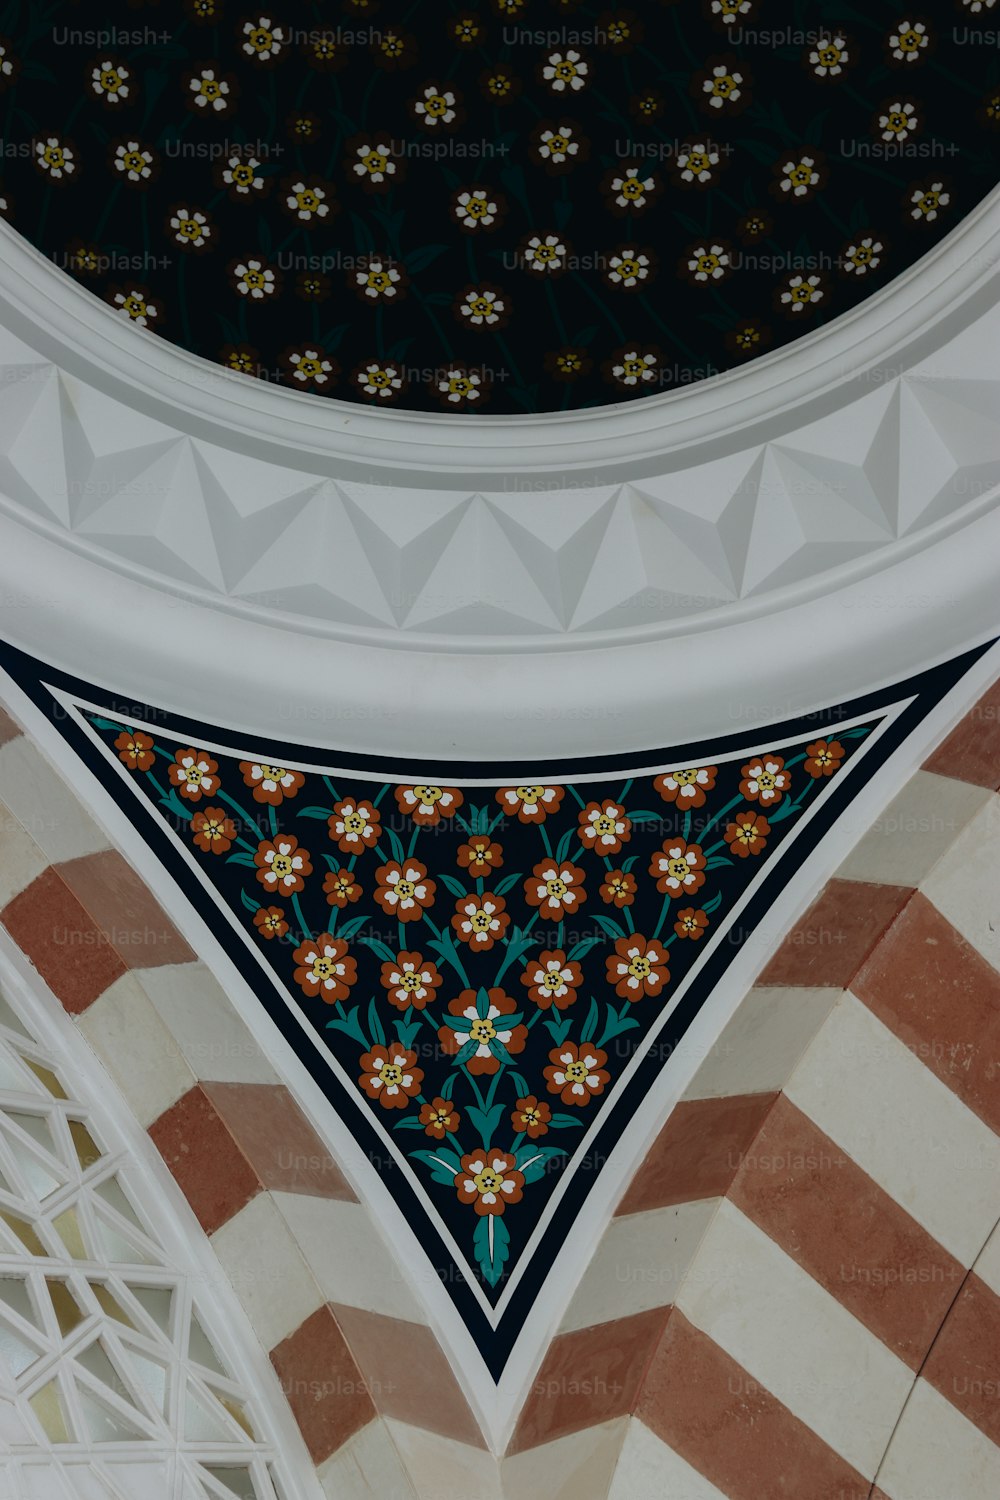 a close up view of a decorative ceiling in a building